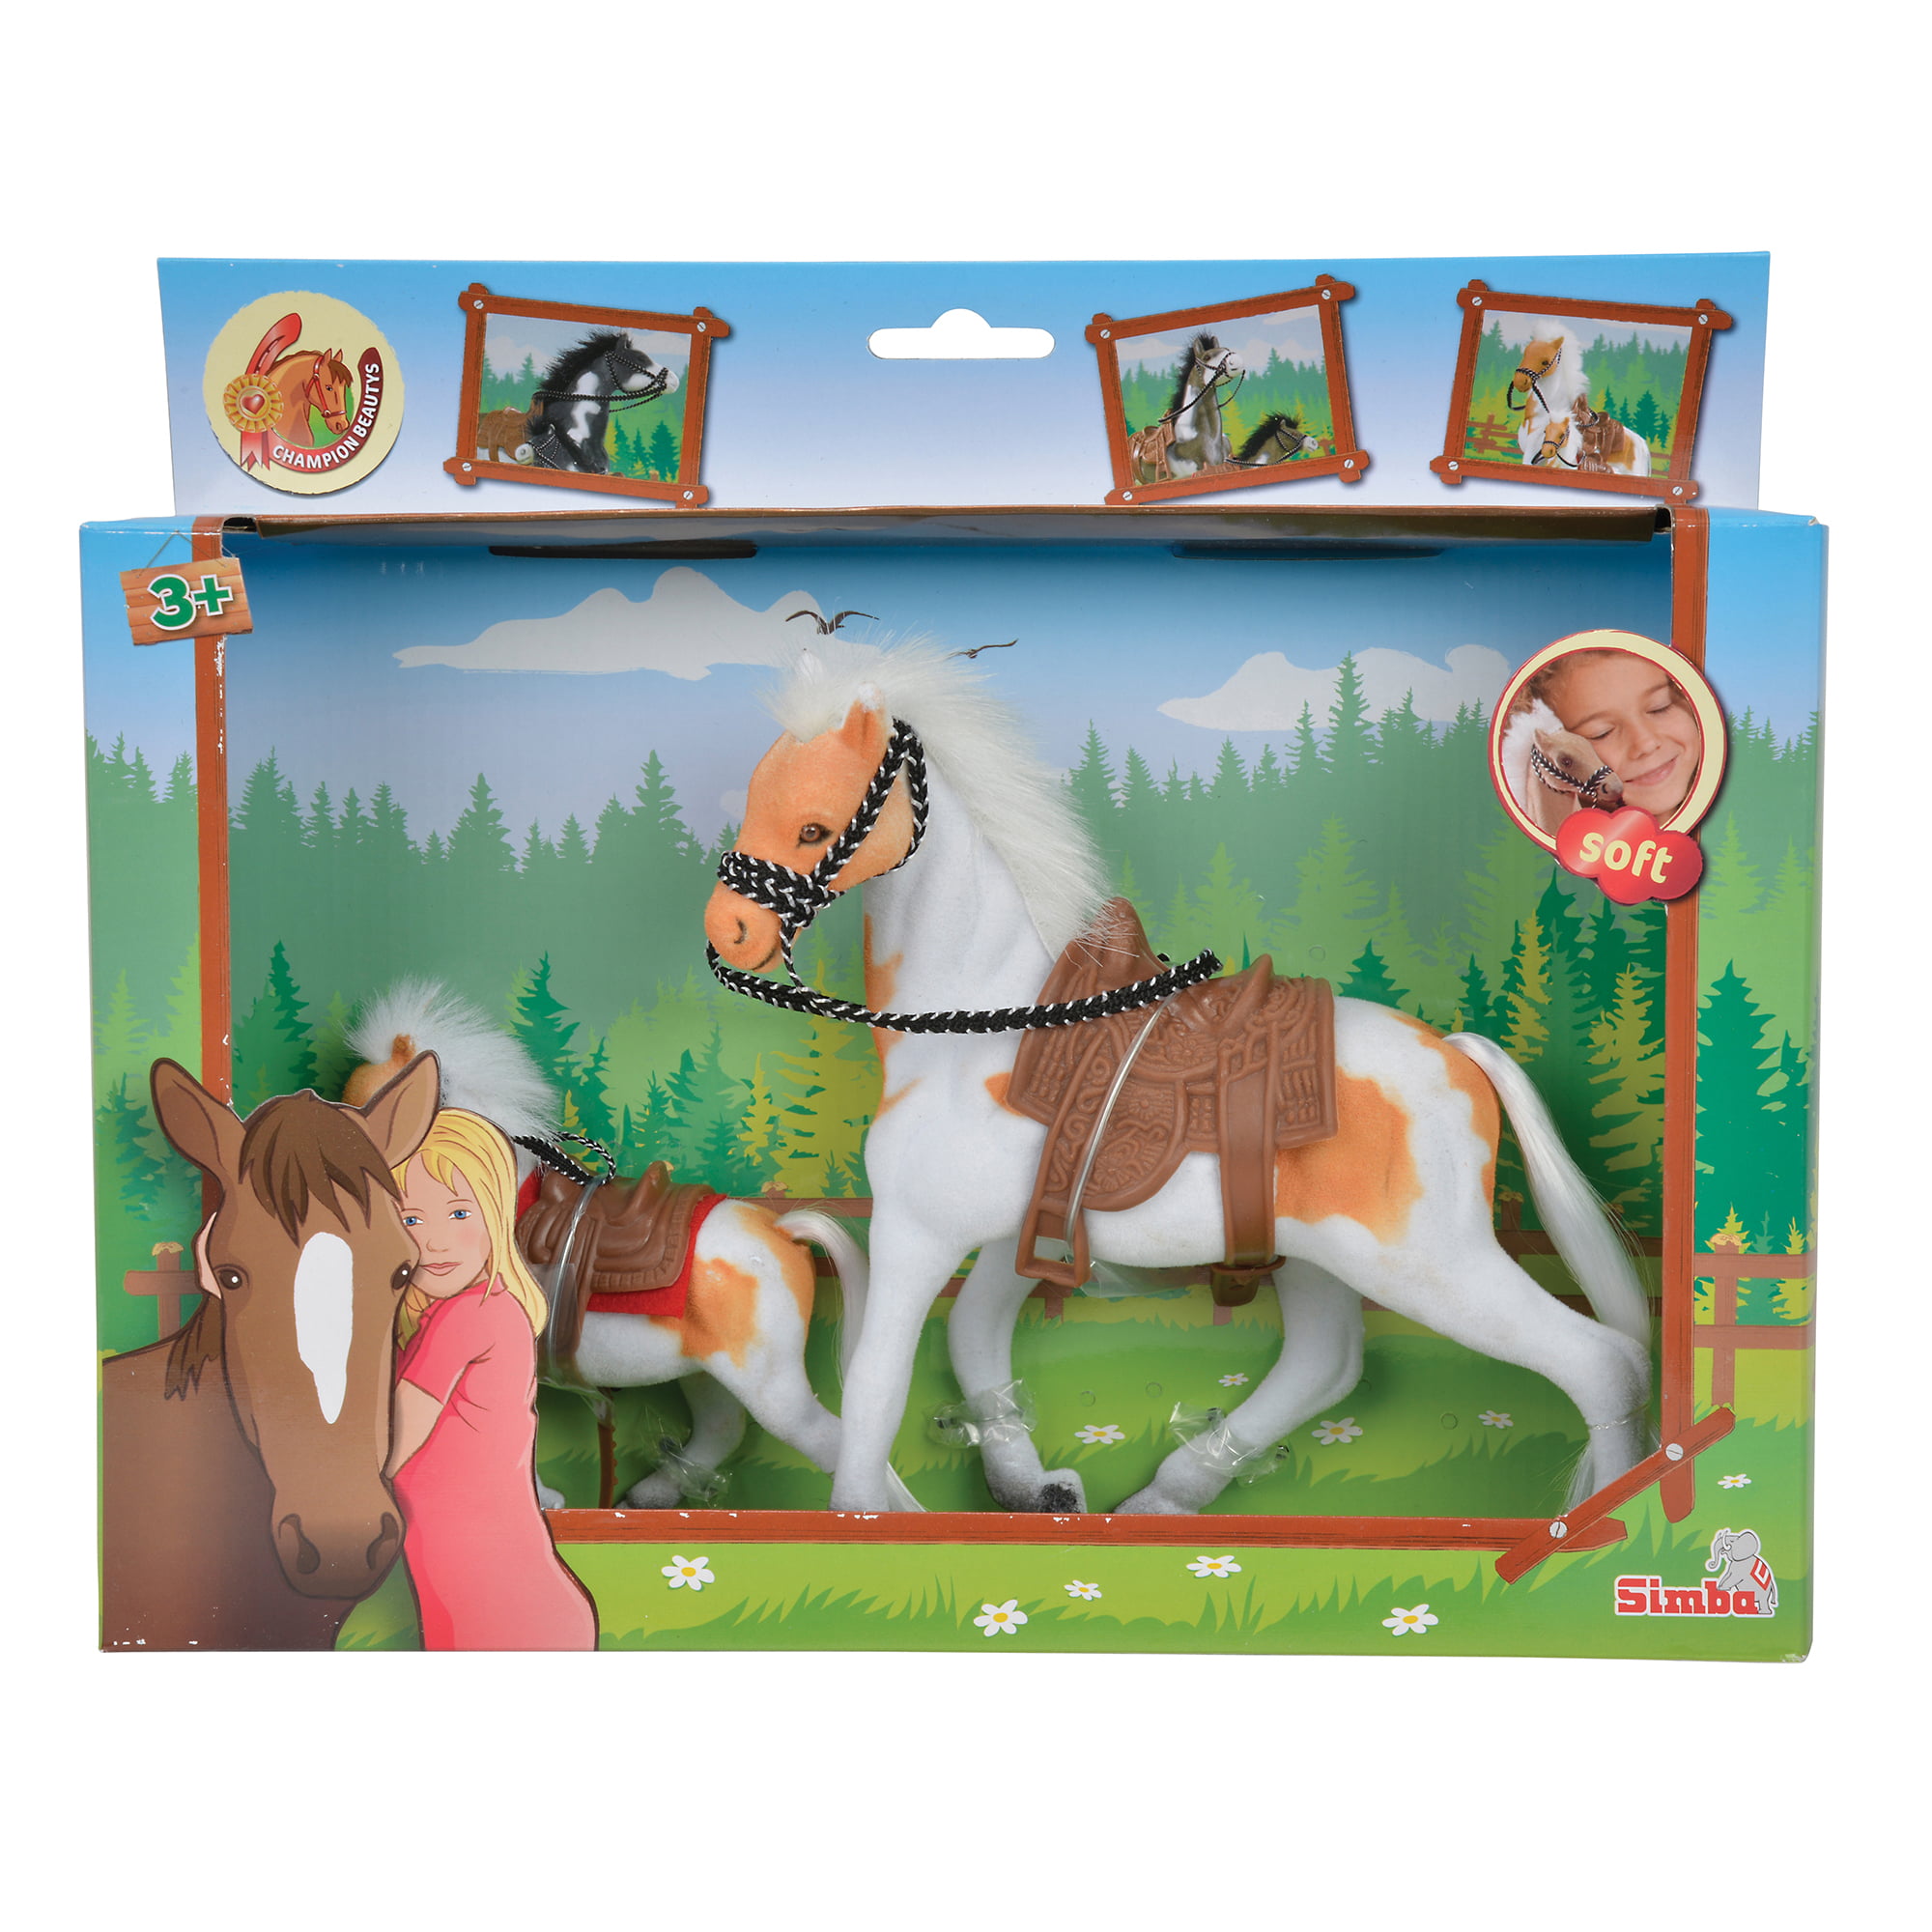 learning and Educational Kids Toys Simba Champion Beauty Horse & Baby Twin Pack 